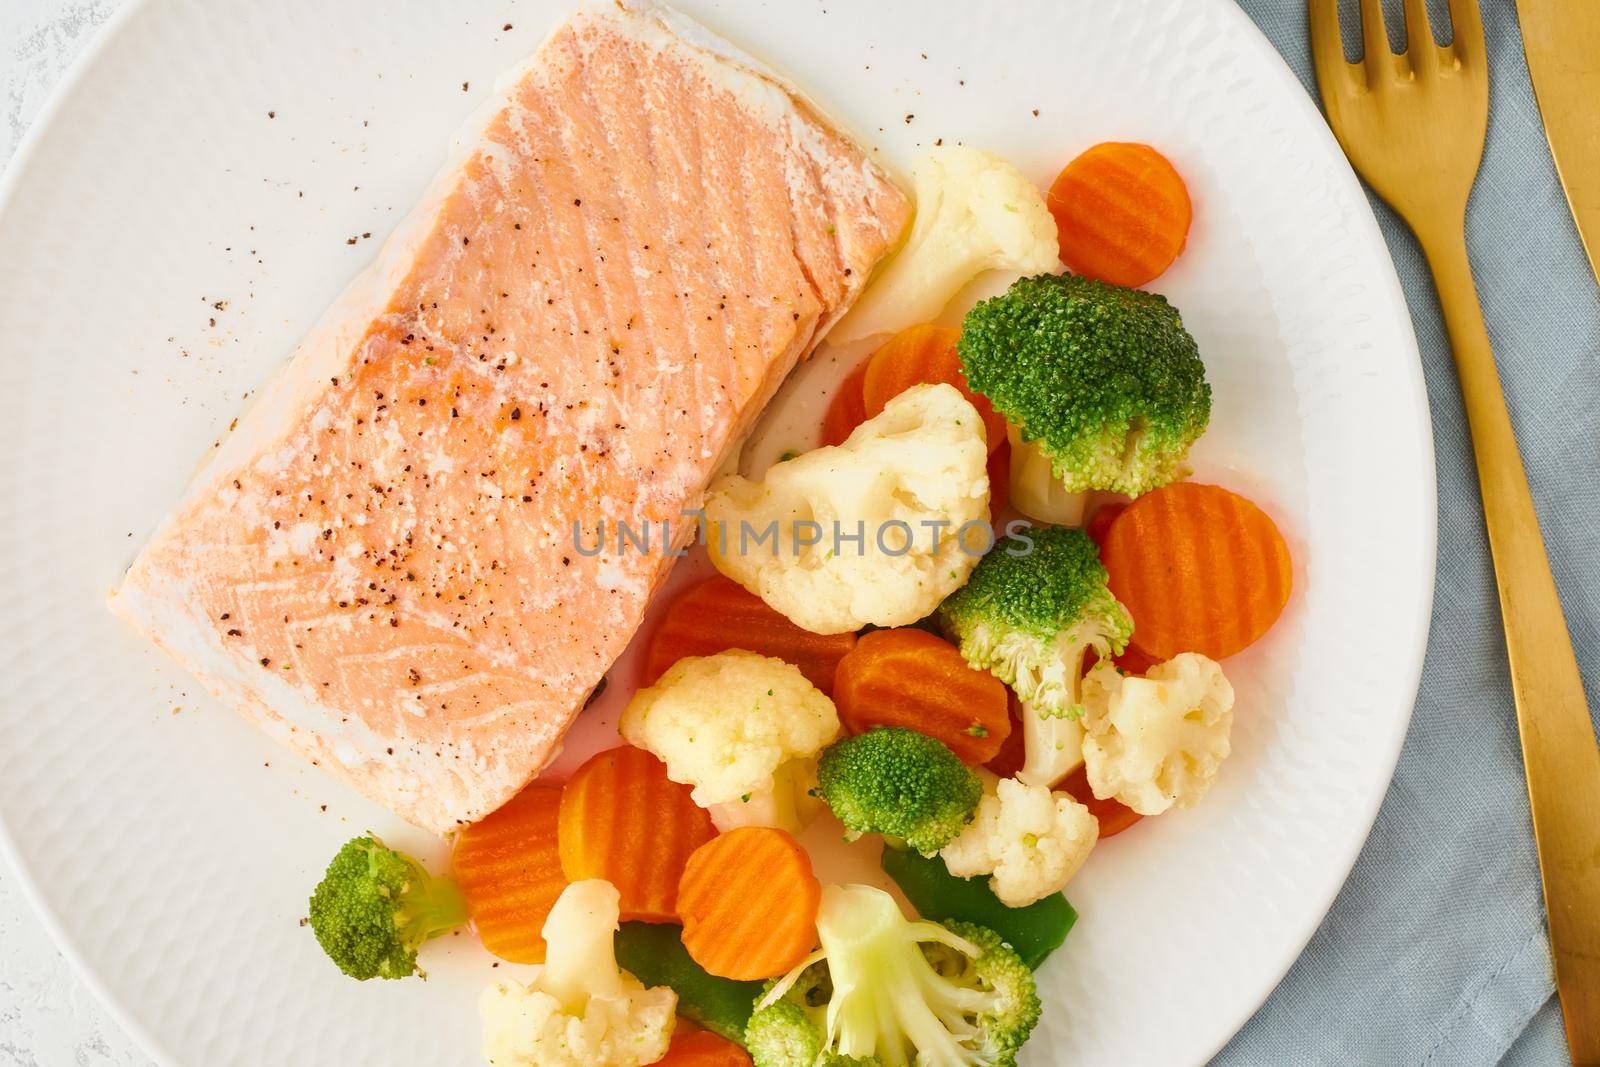 Steam salmon and vegetables, Paleo, keto, fodmap, dash diet. Mediterranean diet with steamed vegetables and fish. Healthy concept, white plate on a gray table, gluten free, lectine free, top view